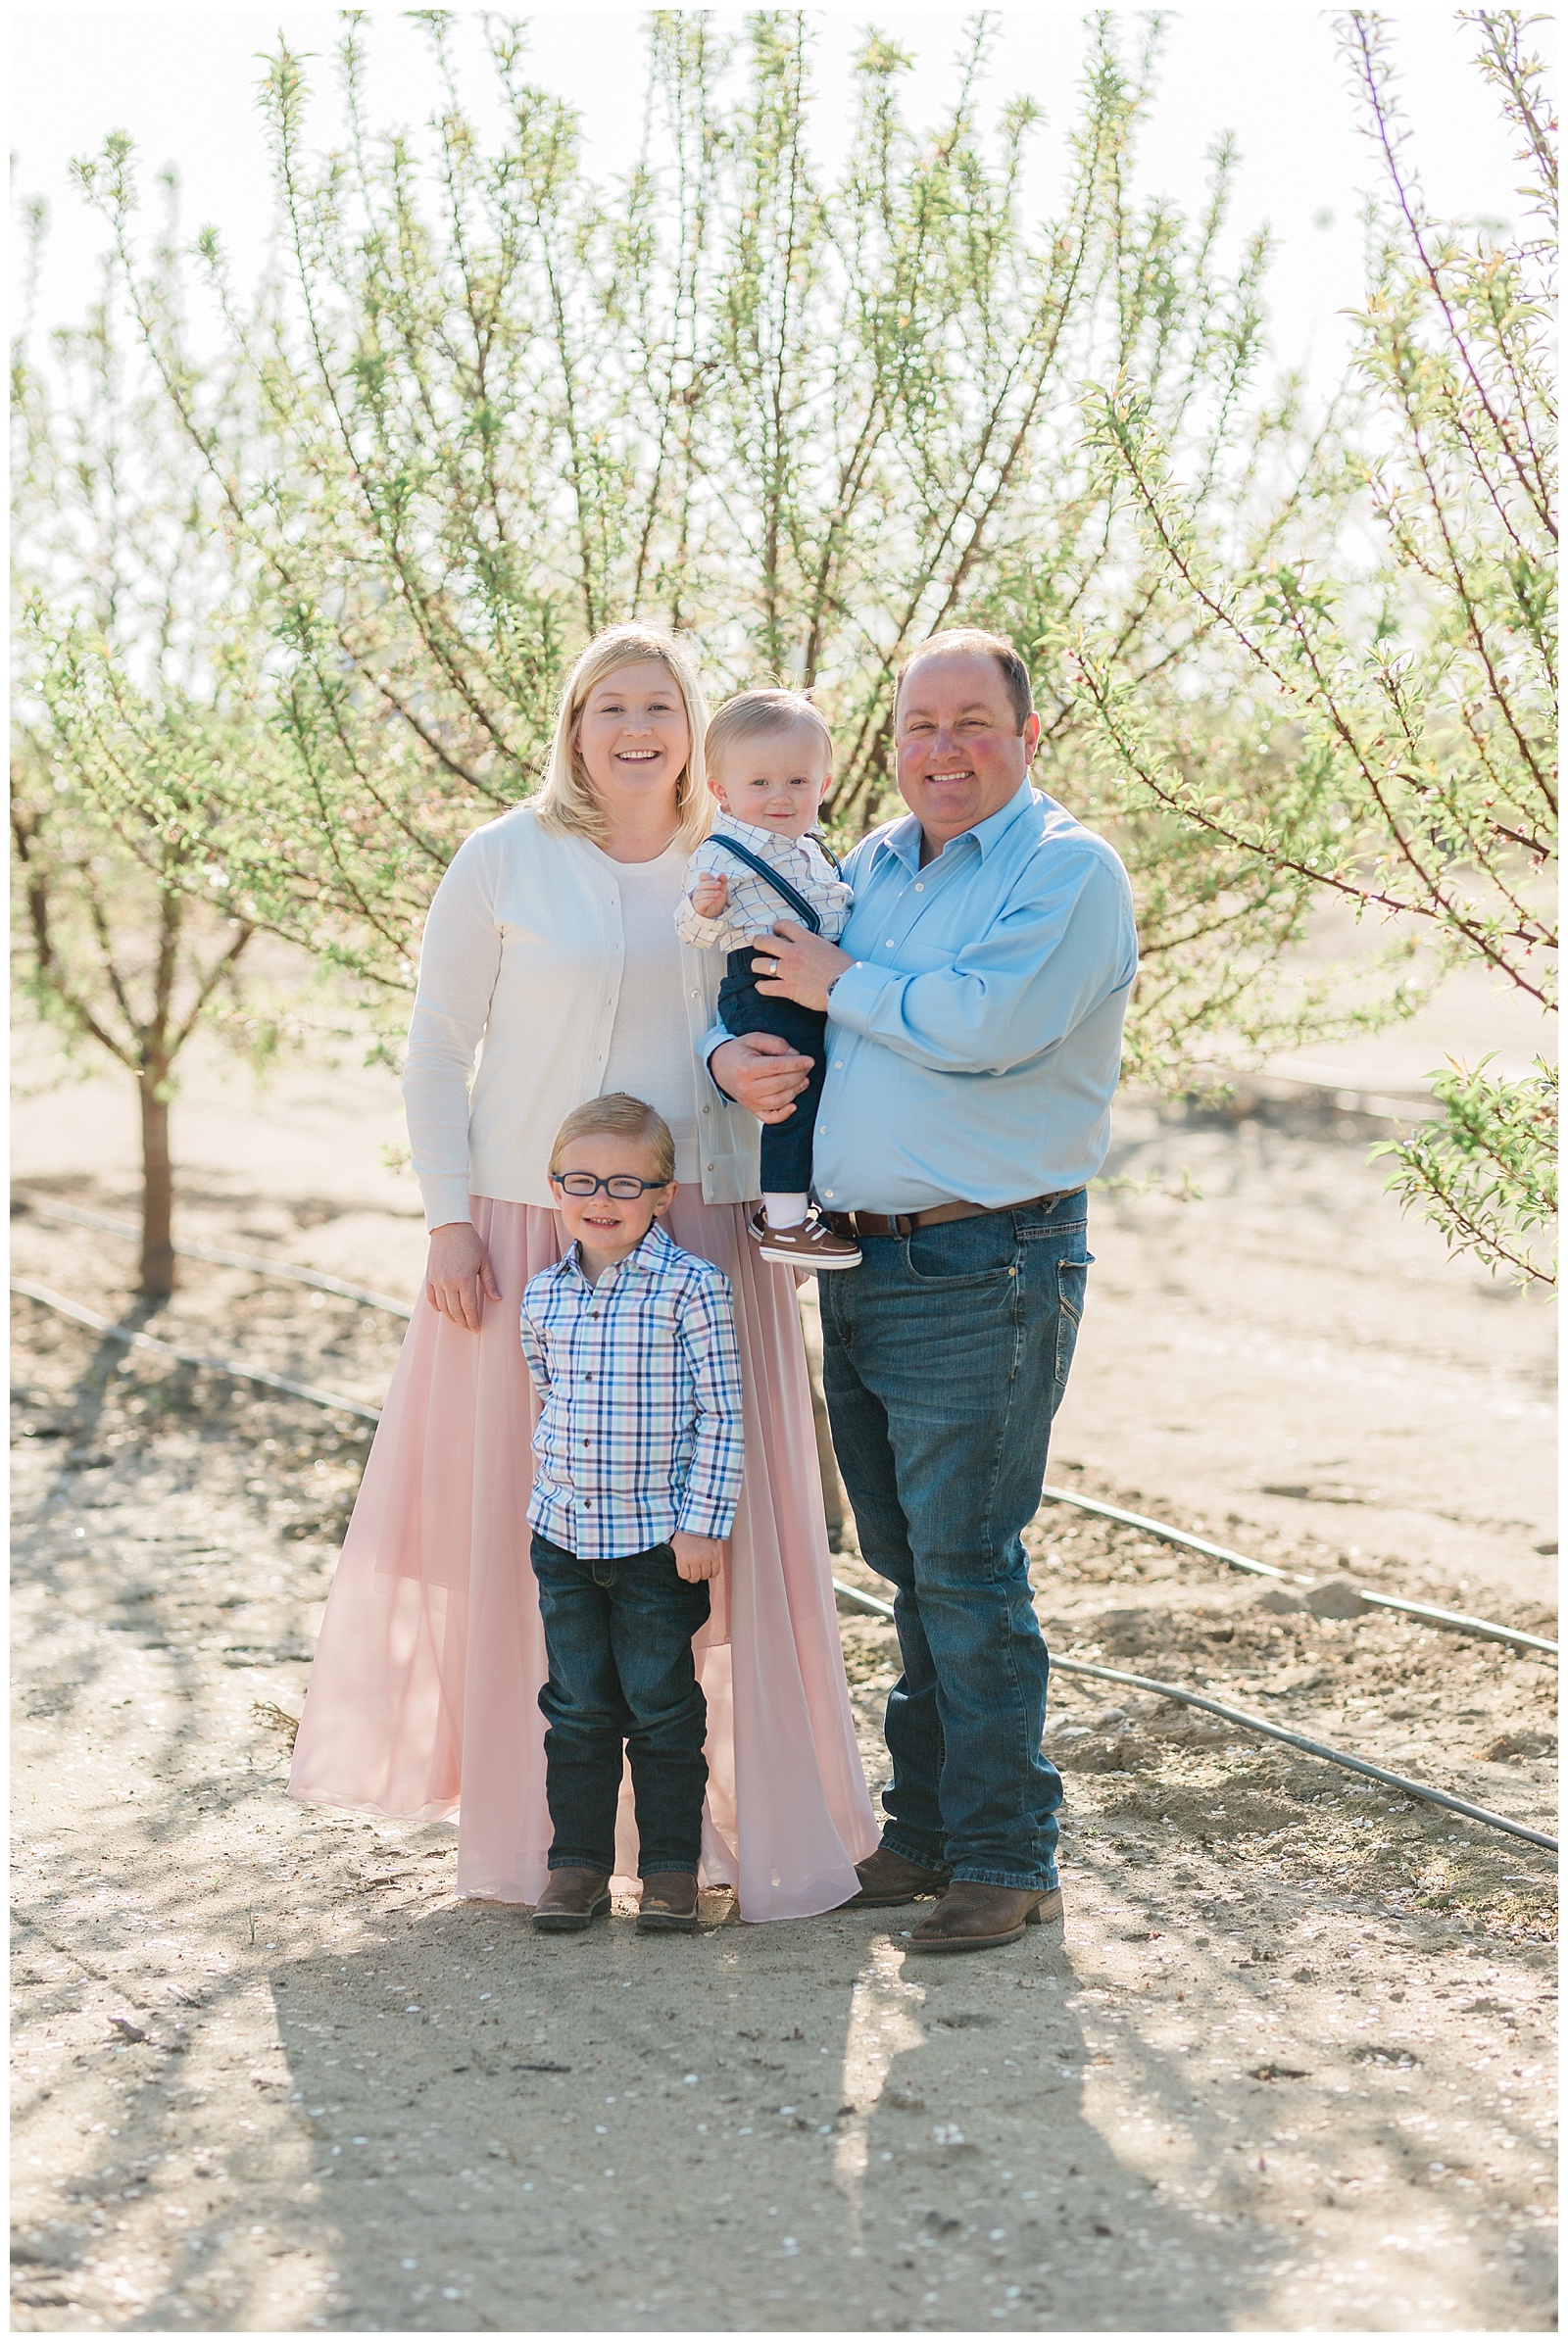 pastel family photo outfit inspiration for spring